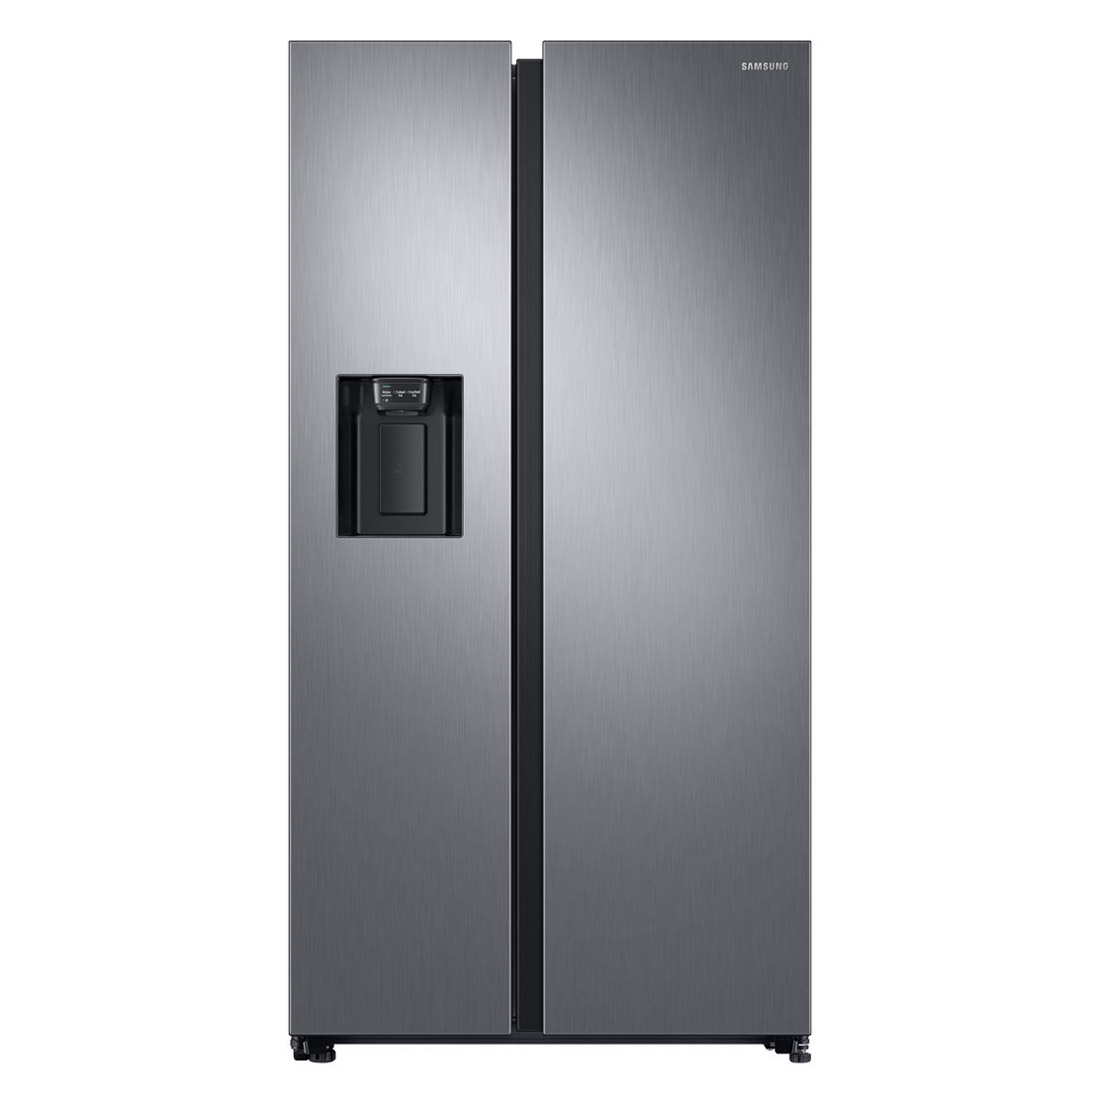 Samsung RS68N8220S9 American Fridge Freezer in Silver PL I W F Rated